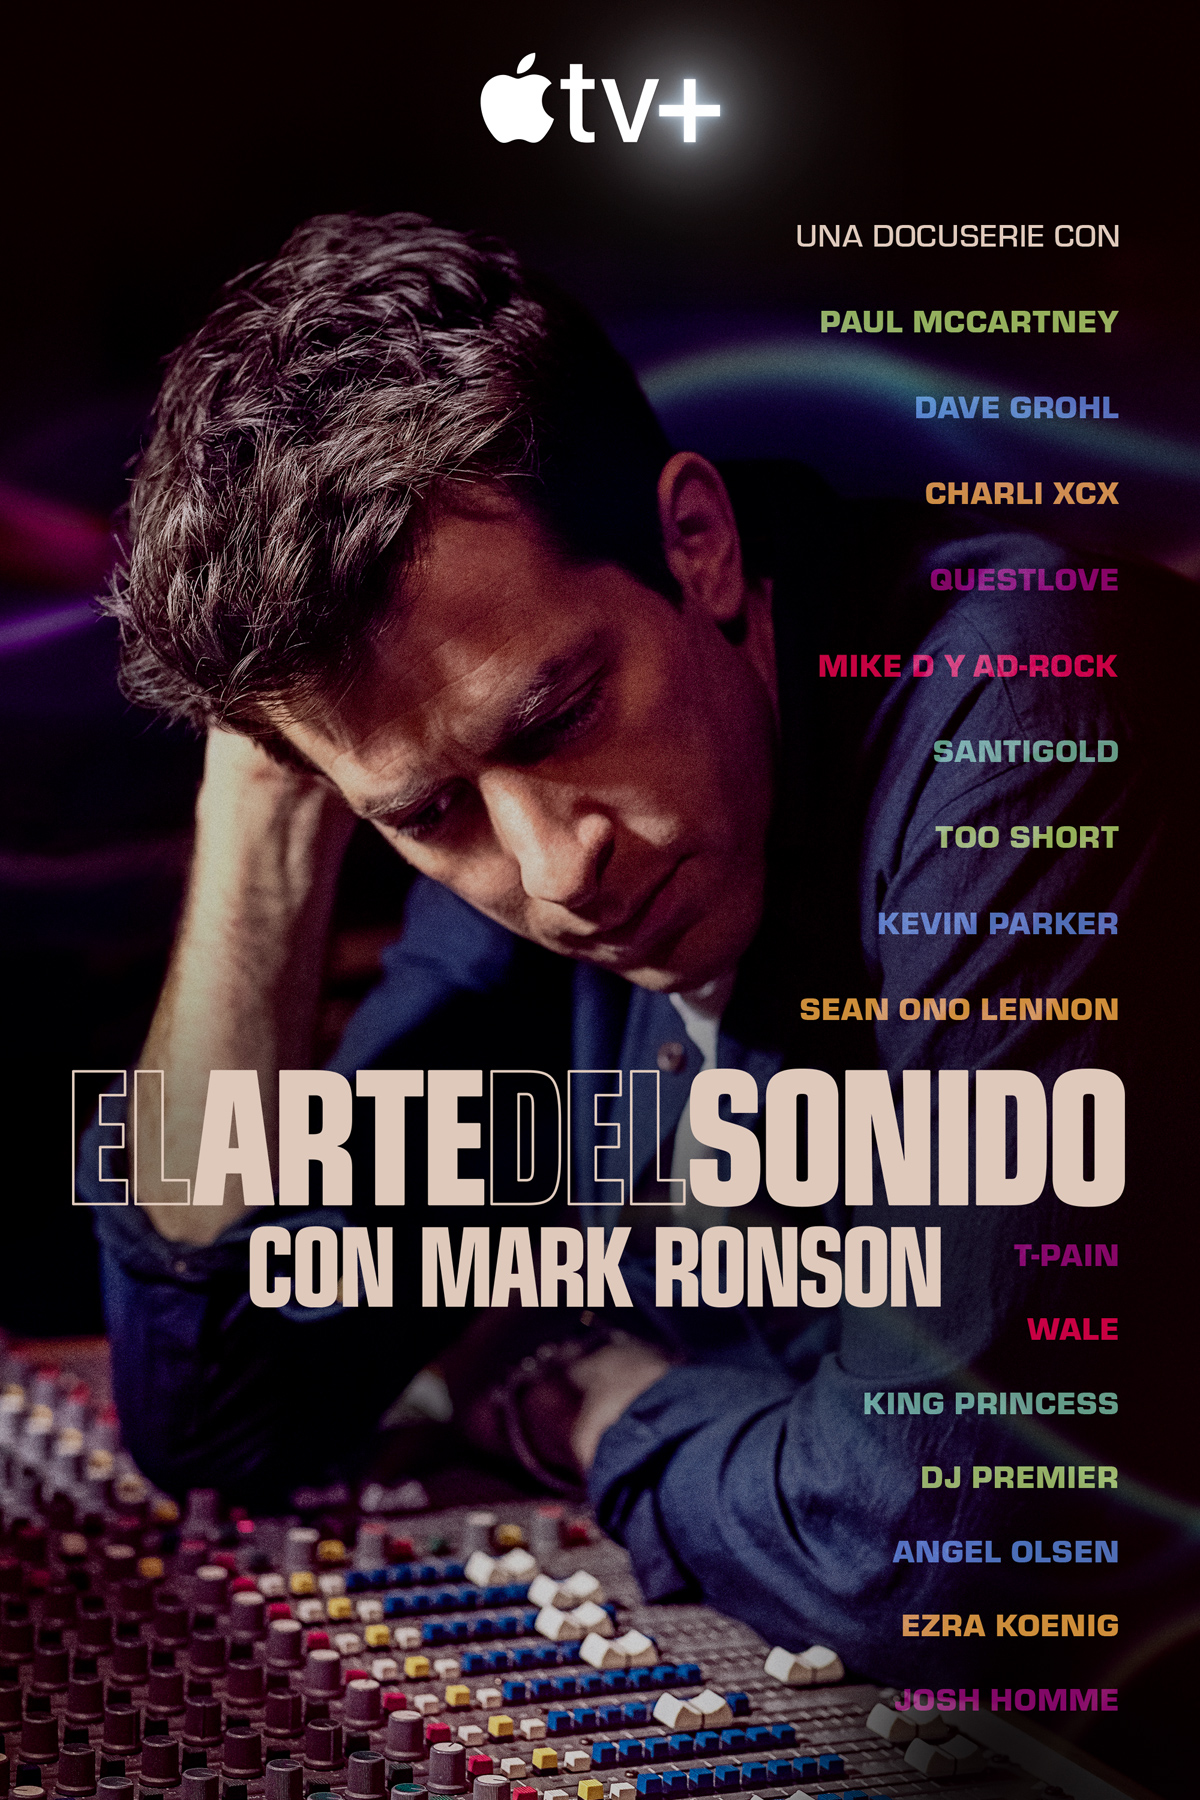 Watch the Sound with Mark Ronson saison 1